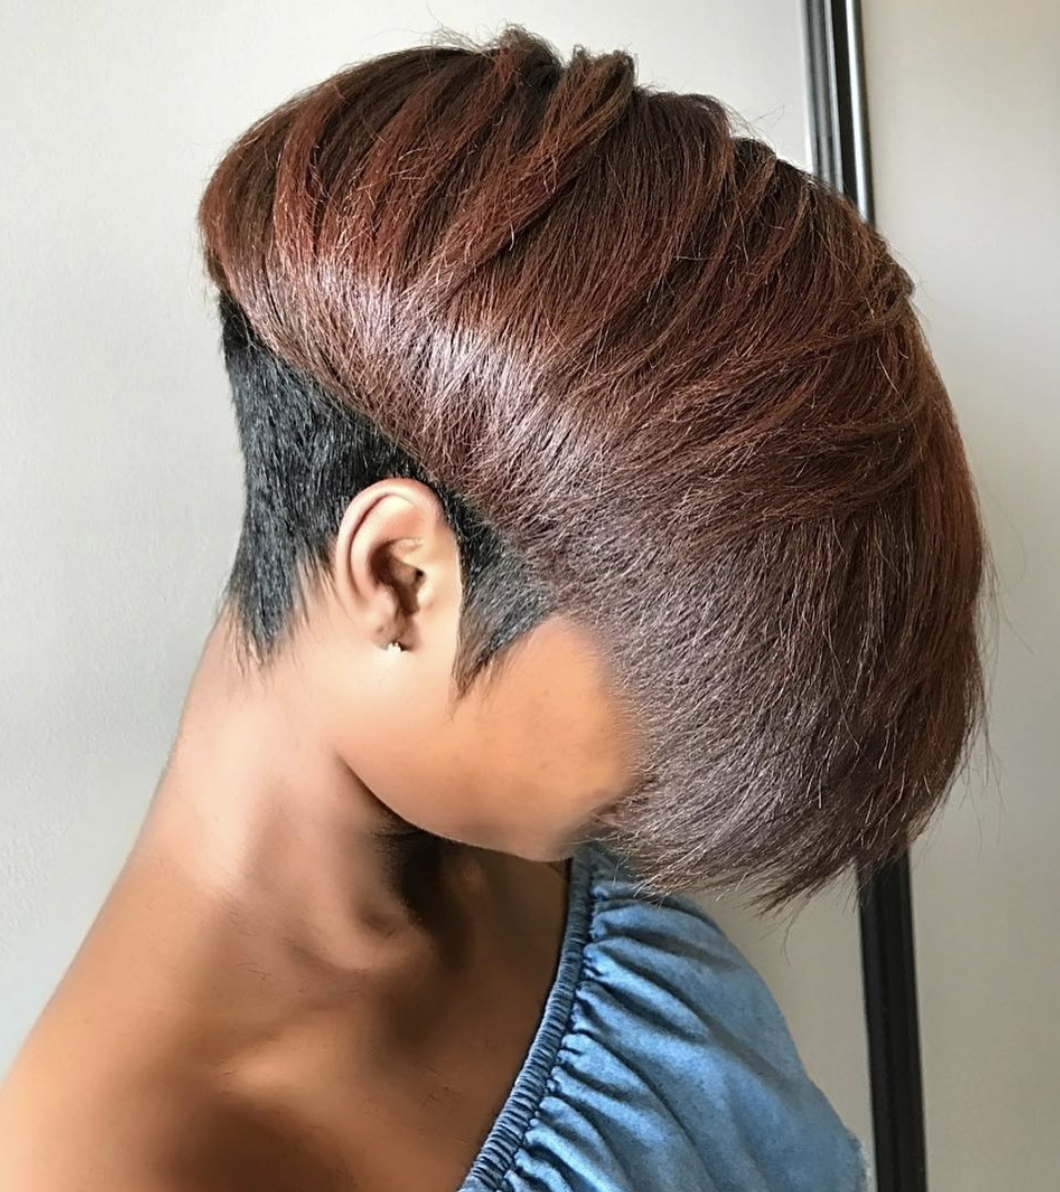 Pin by pink🧚🏽. on Hairstyles | Human hair wigs, Hair ponytail styles, Birthday  hairstyle… | Human hair wigs, Sleek ponytail hairstyles, Front lace wigs  human hair